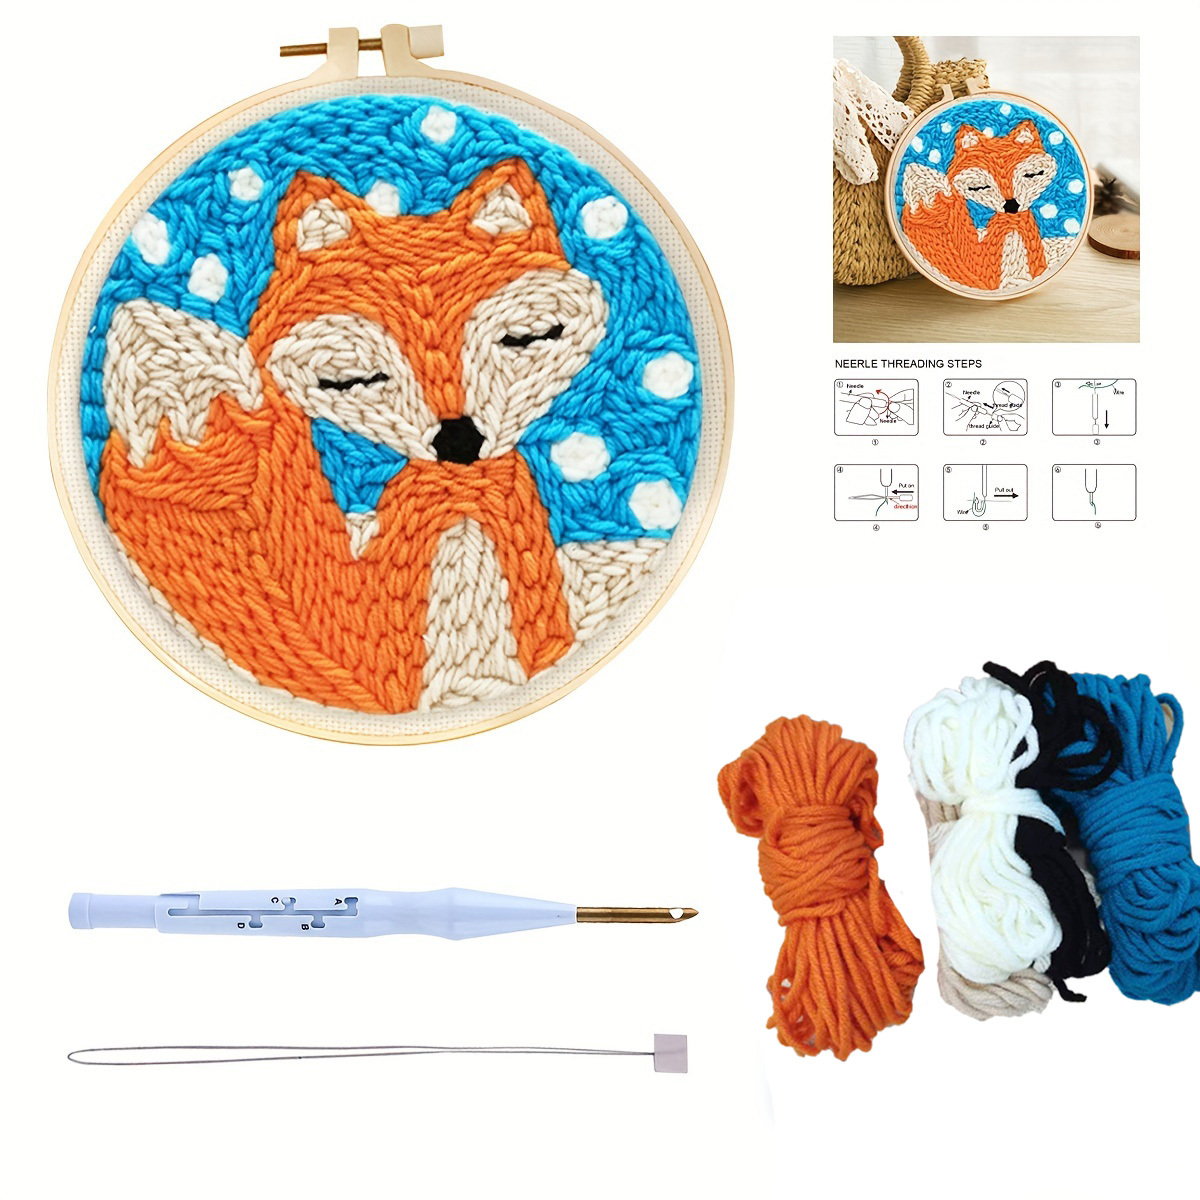 Feltsky Dinosaur Punch Needle Kit for Beginners, Including 8 INCH Hoop,  Pattern, Cotton Threads, Punch Needles, Needle Threader, Instruction